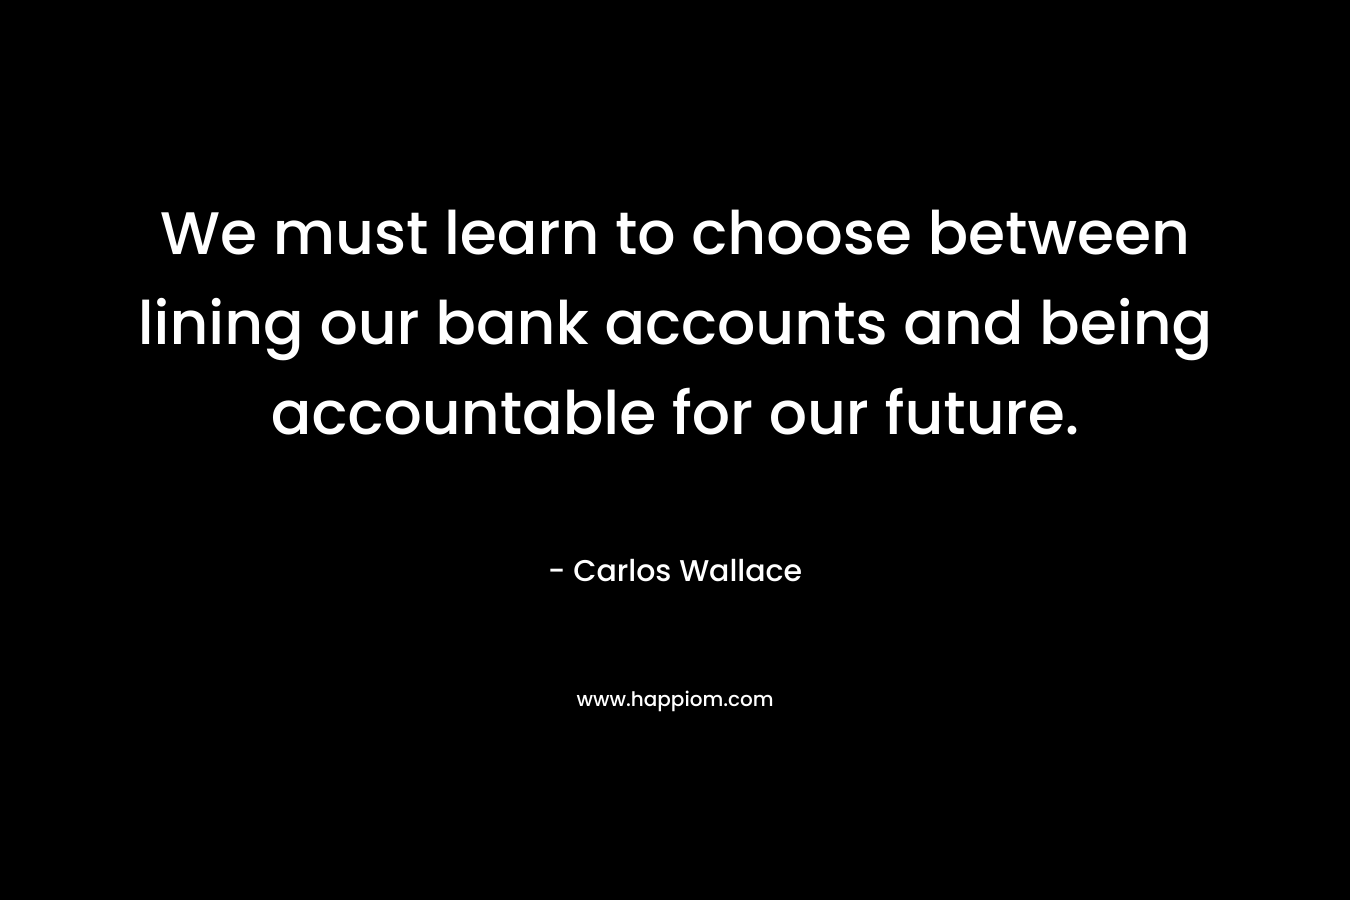 We must learn to choose between lining our bank accounts and being accountable for our future. – Carlos Wallace